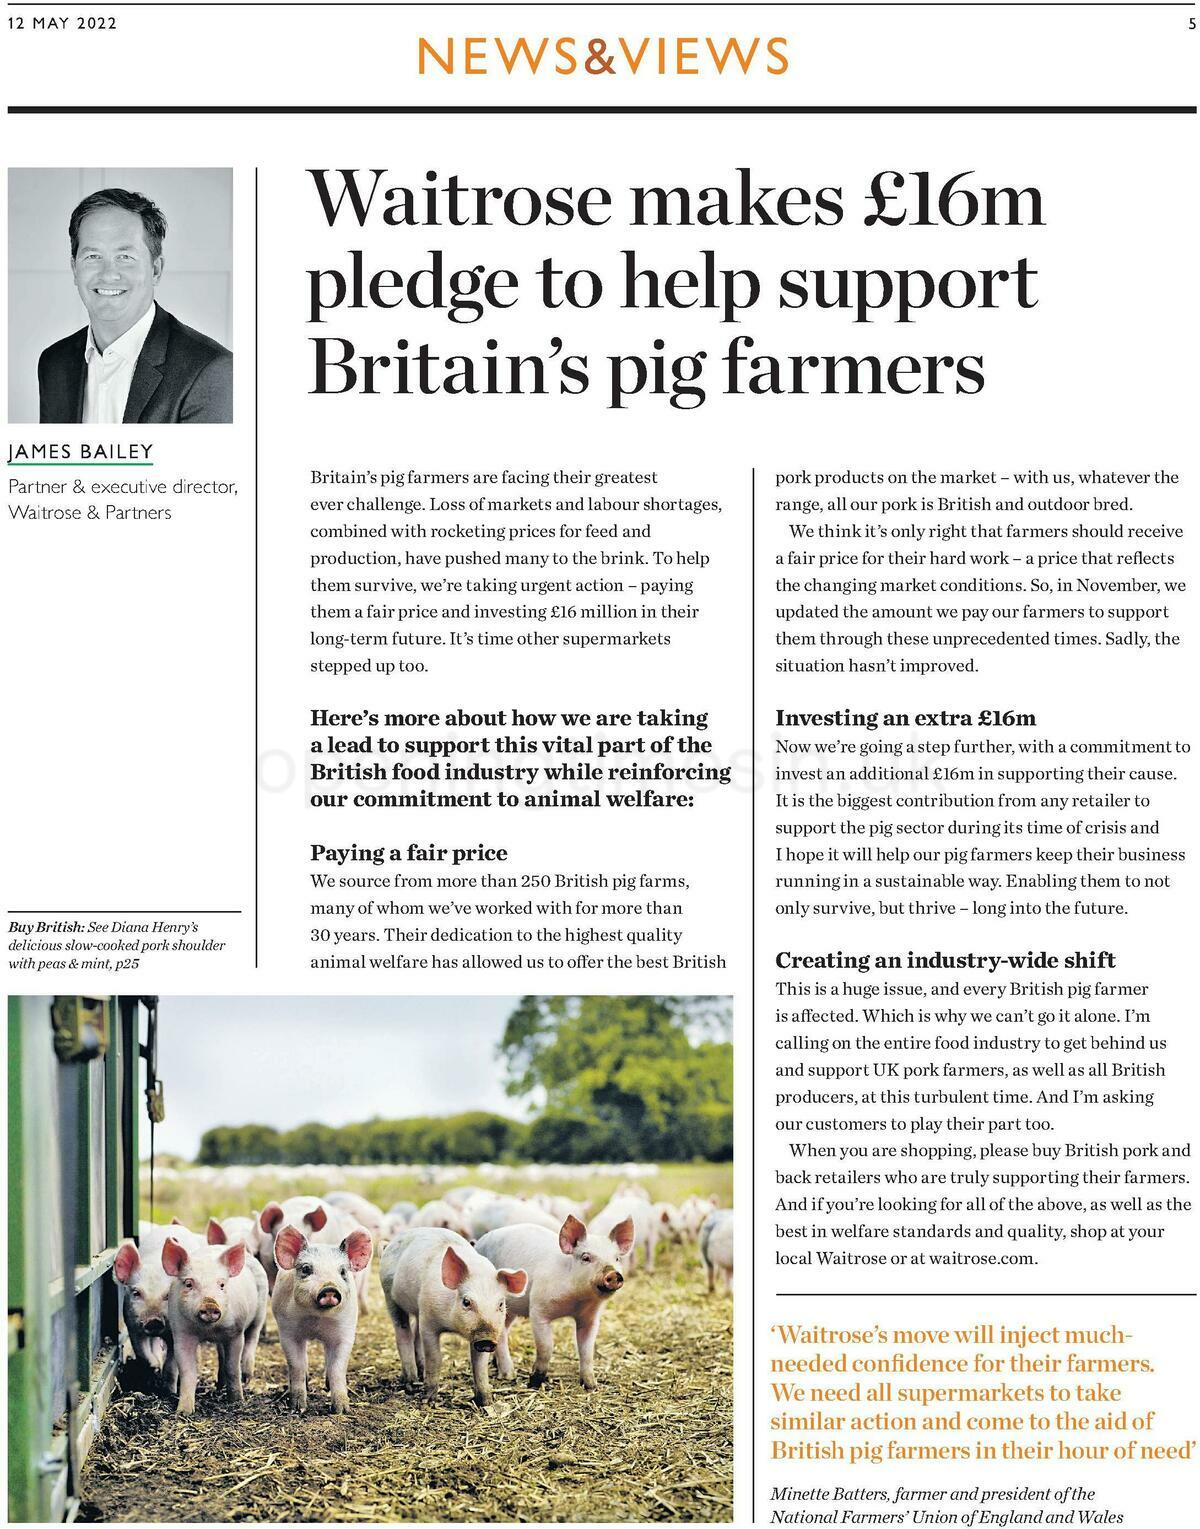 Waitrose Offers from 12 May